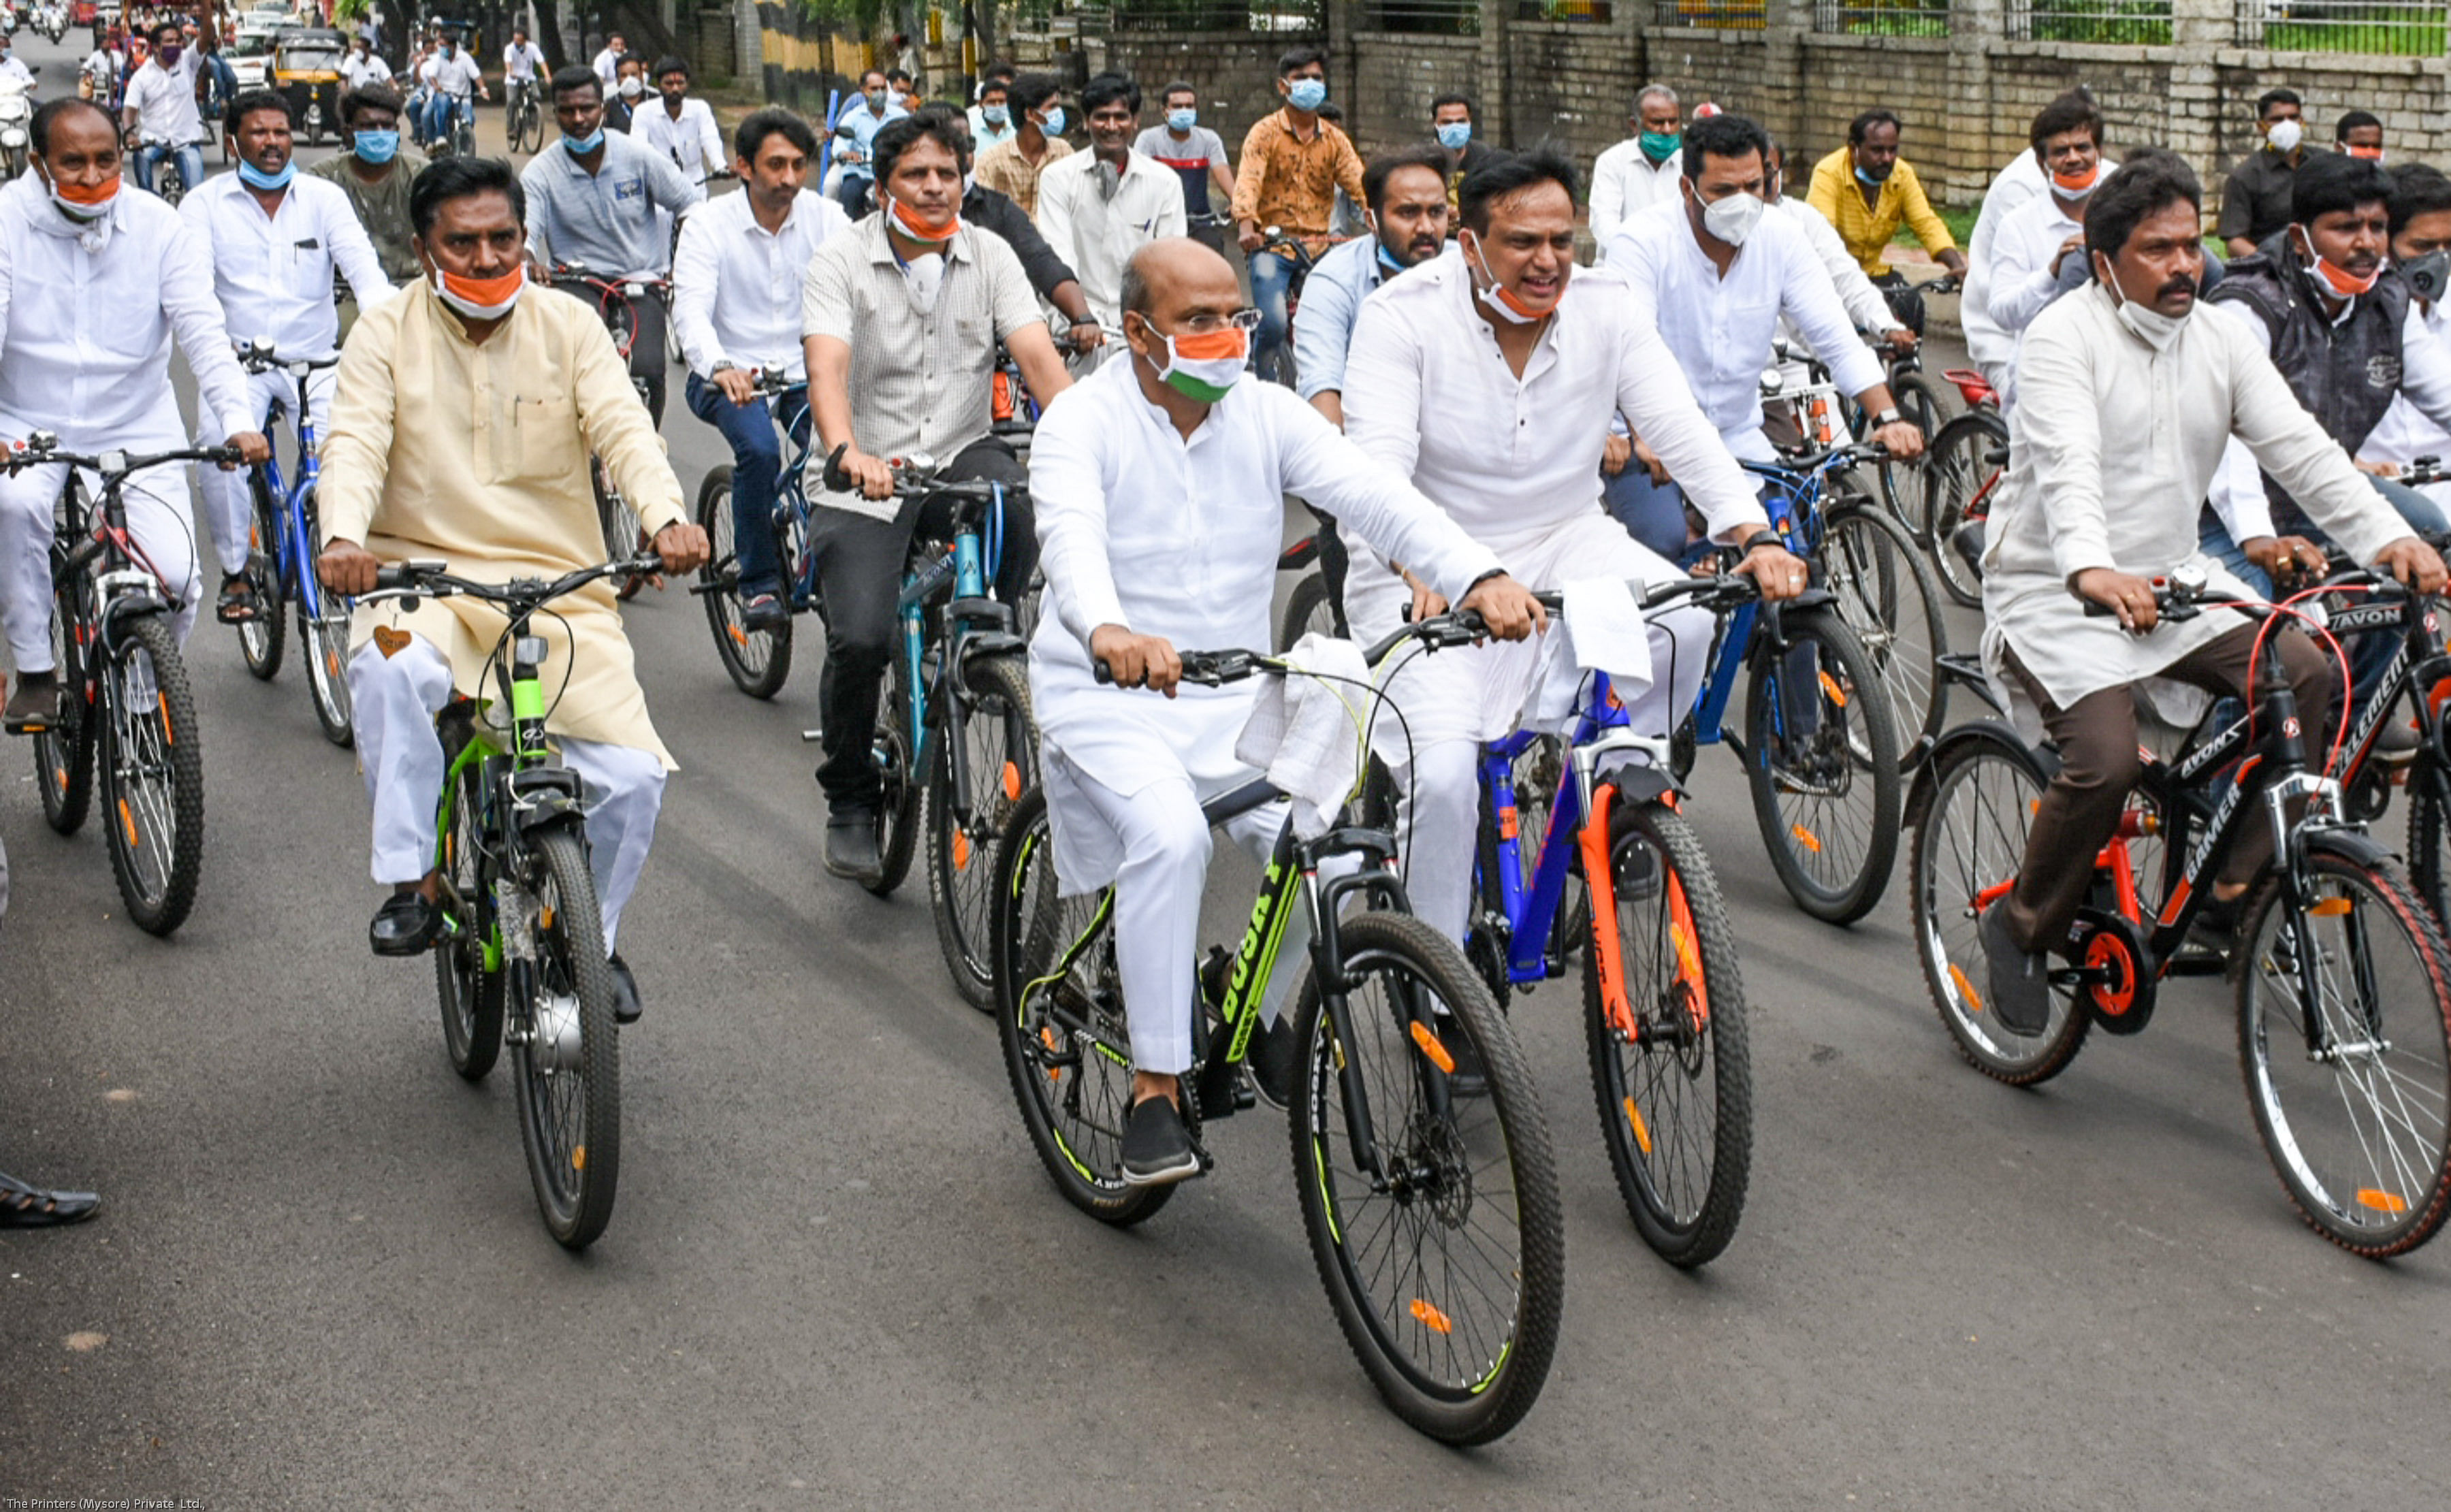 Riding horse-carts and bicycles, Congress leaders across the country led protests against the daily increase in fuel prices. Credits: DH Photo